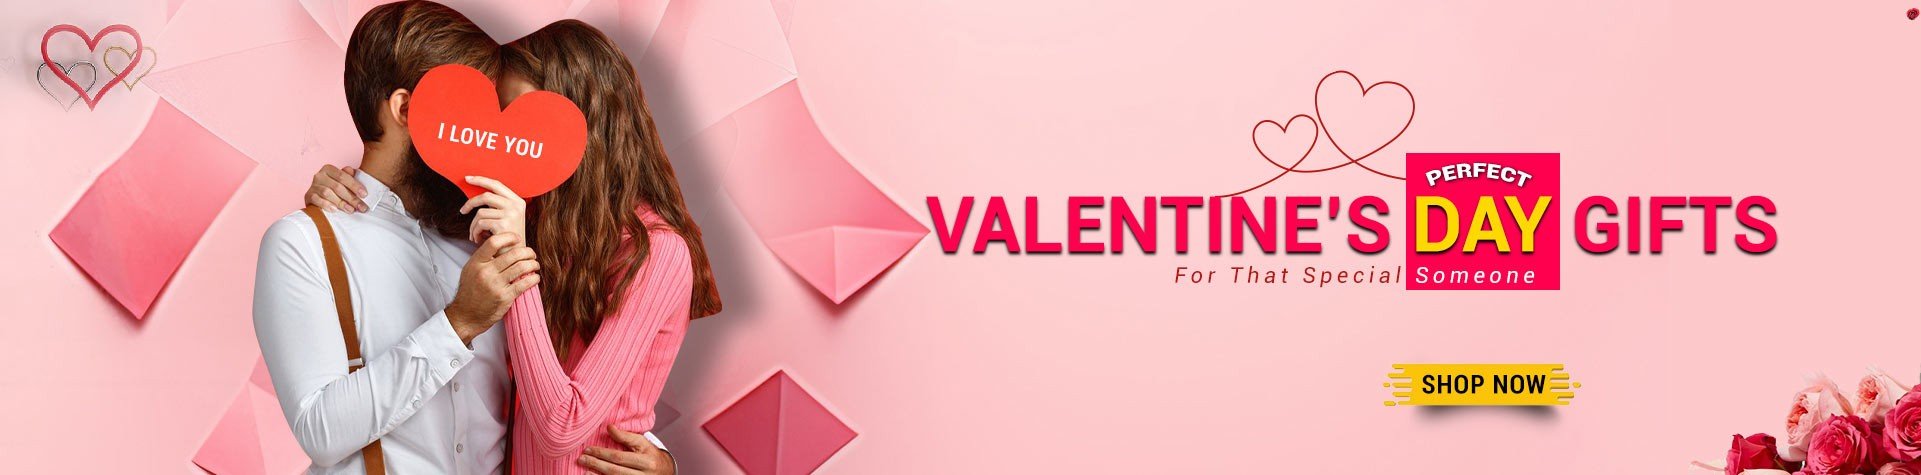 Valentine Express Gifts Delivery  Online